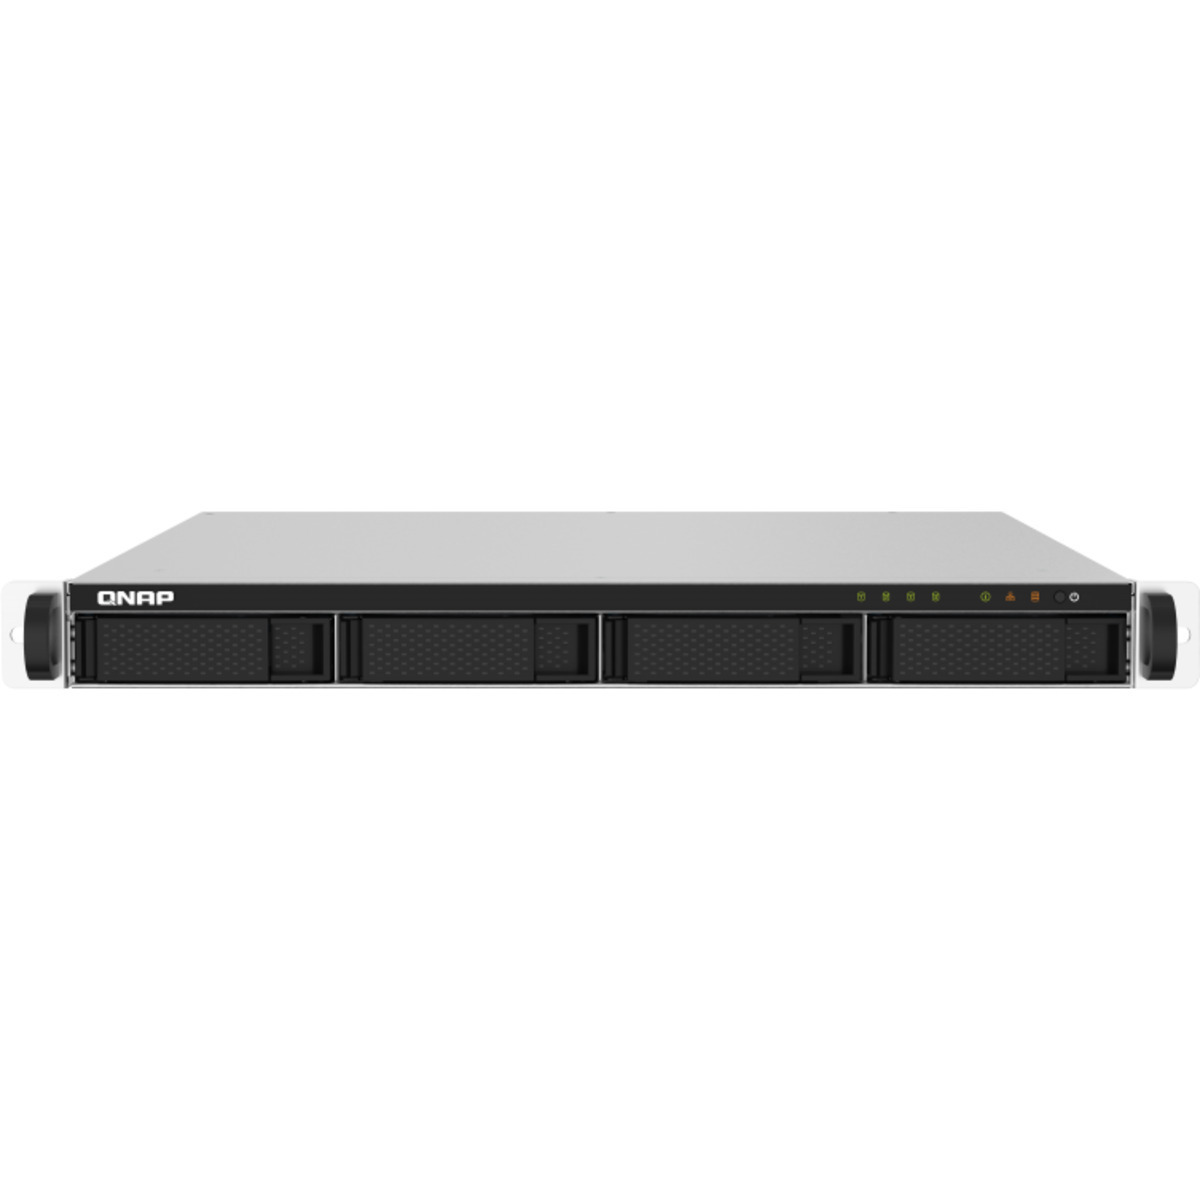 buy QNAP TS-432PXU RackMount NAS - Network Attached Storage Device Burn-In Tested Configurations - FREE RAM UPGRADE - nas headquarters buy network attached storage server device das new raid-5 free shipping usa christmas new year holiday sale TS-432PXU